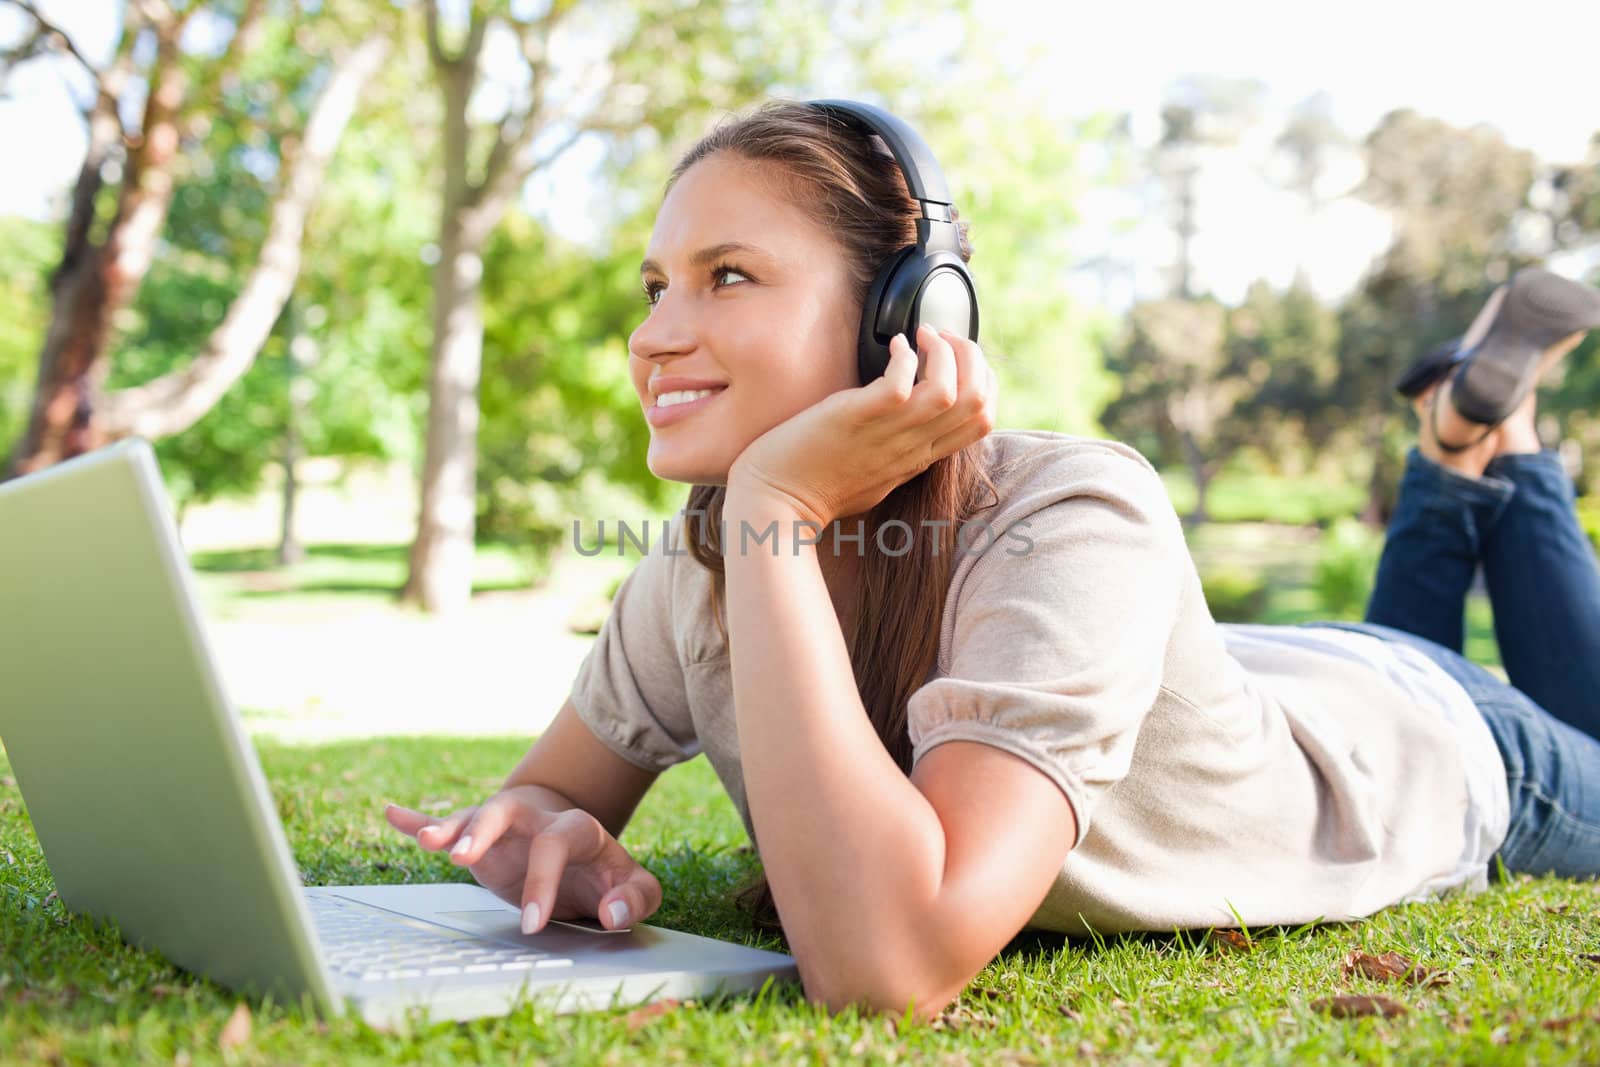 Smiling young woman with headphones and a laptop lying on the lawn